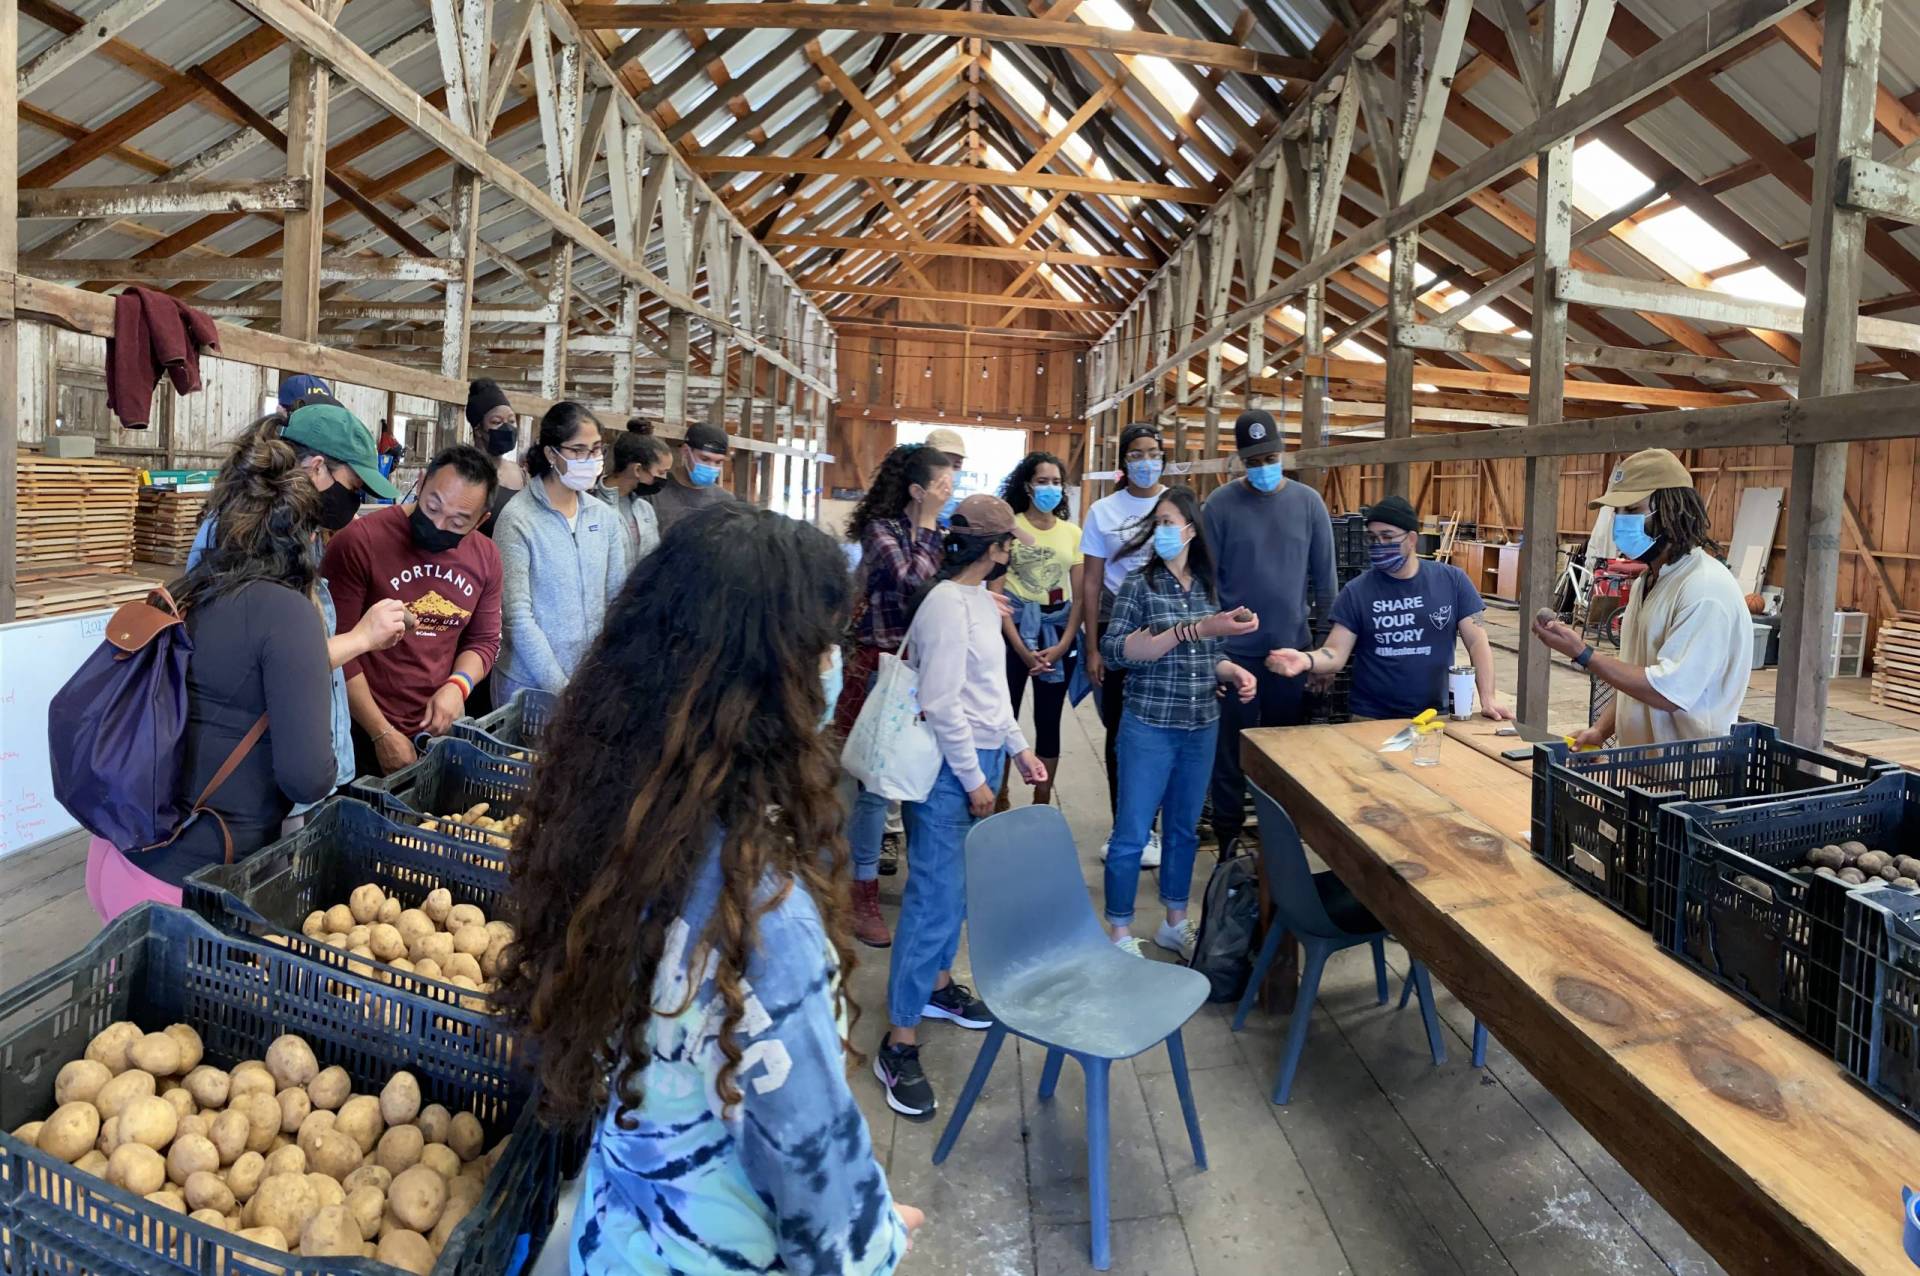 People gather in a farm structure, next to boxes of potatoes.